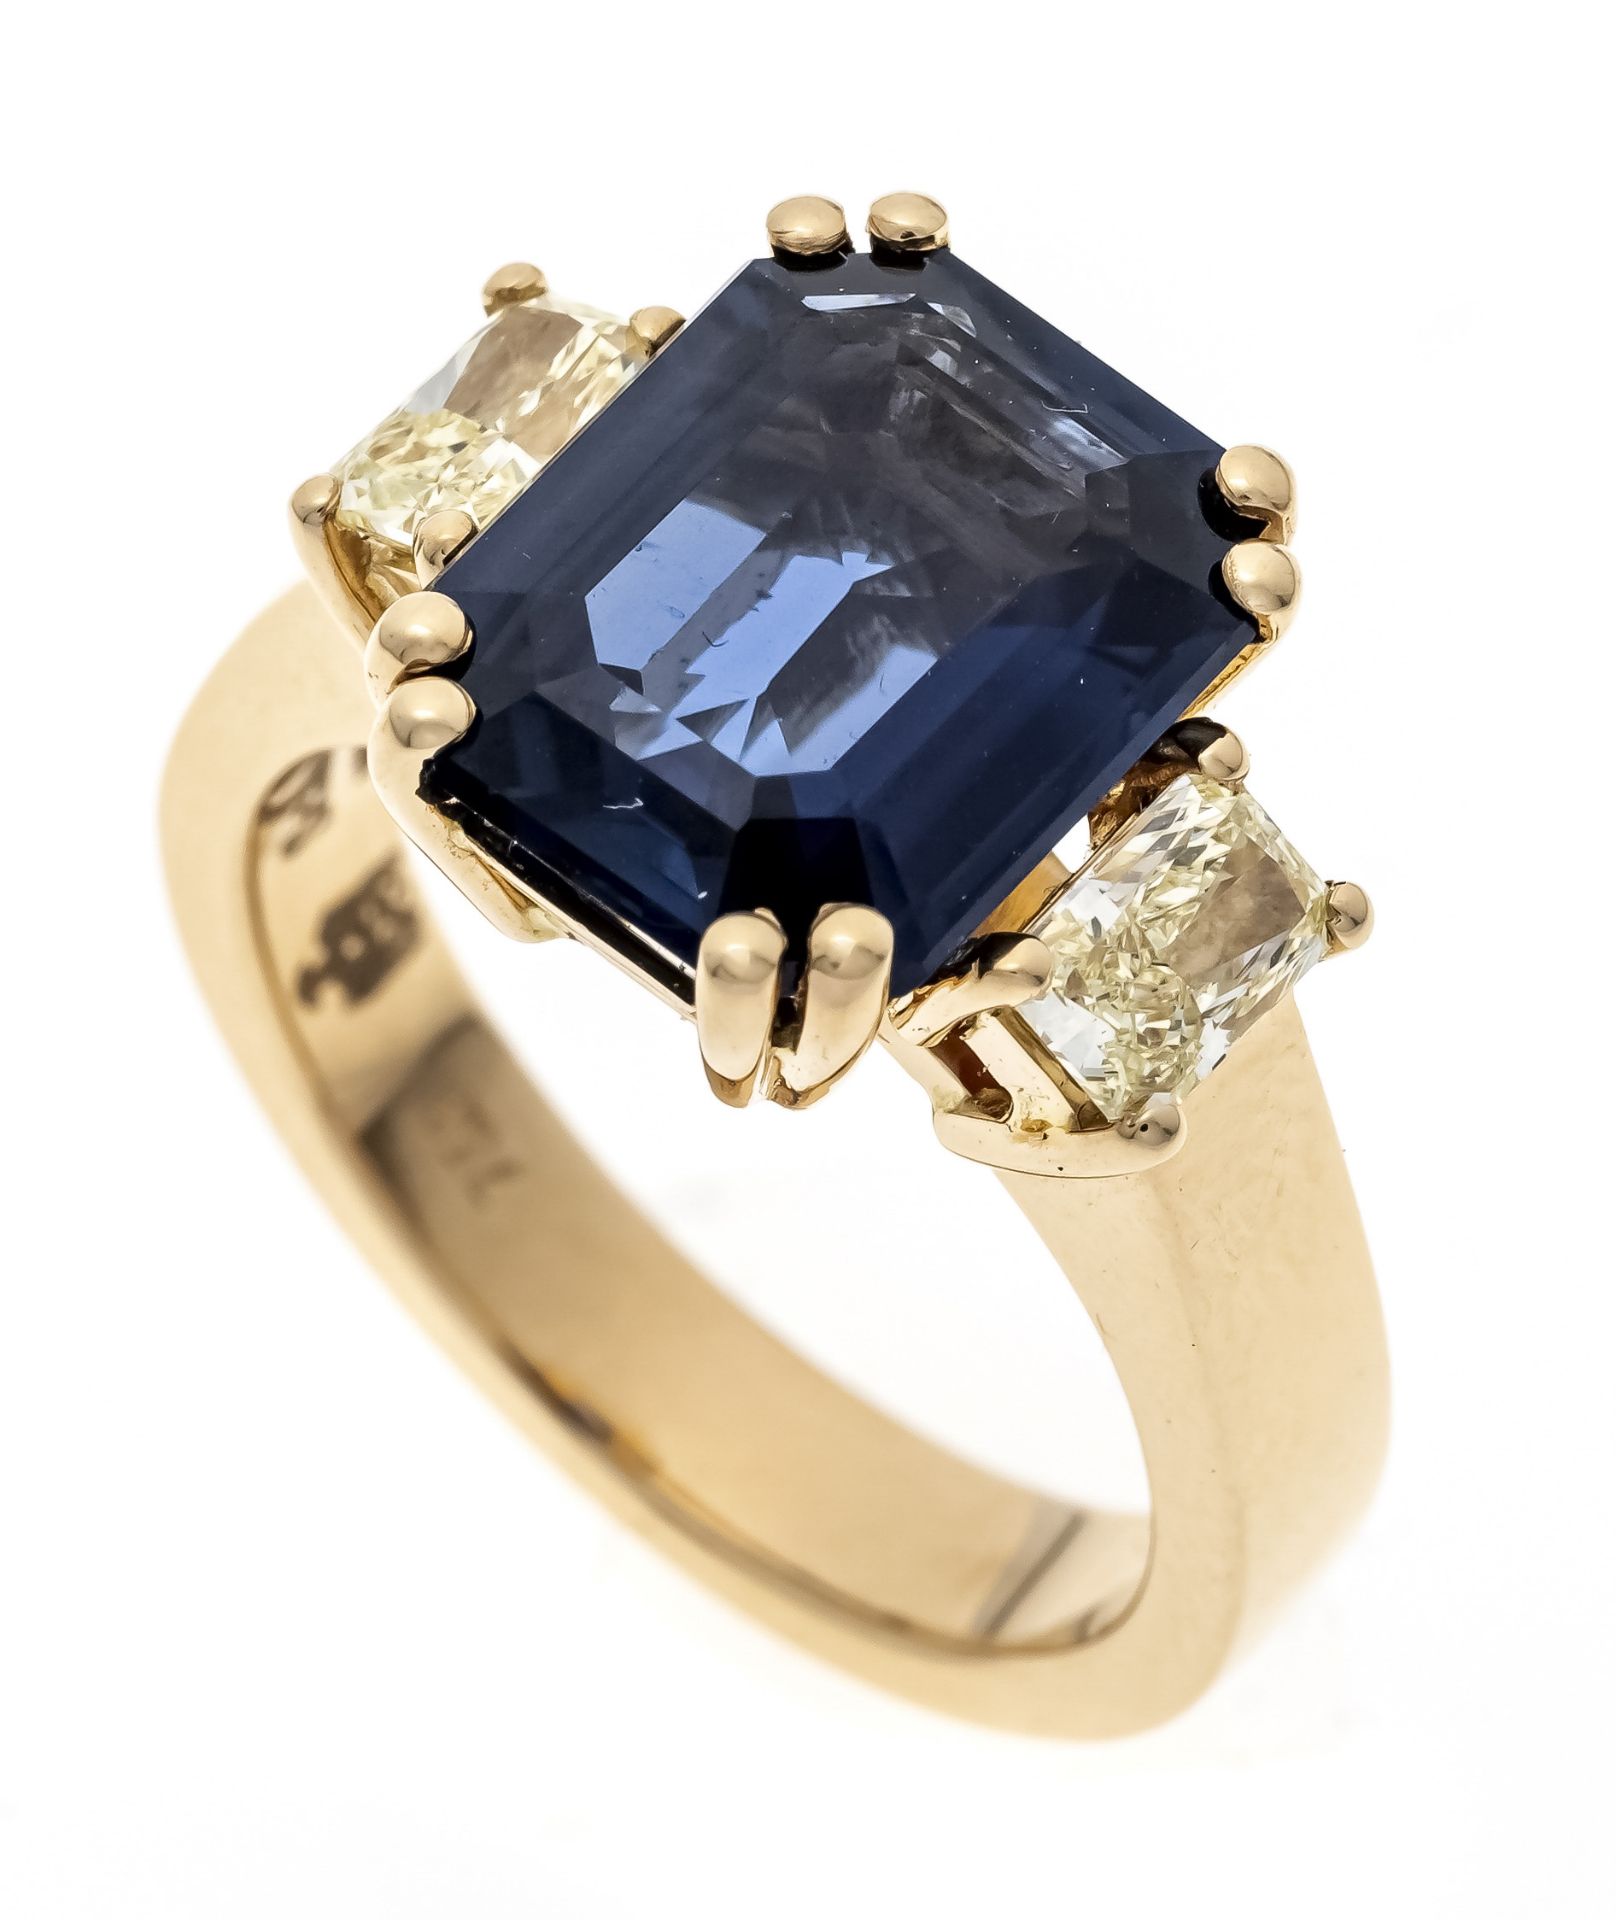 Schupp Sapphire Fancy Diamond Ring GG 750/000 with an excellent, unheated, emerald-cut faceted